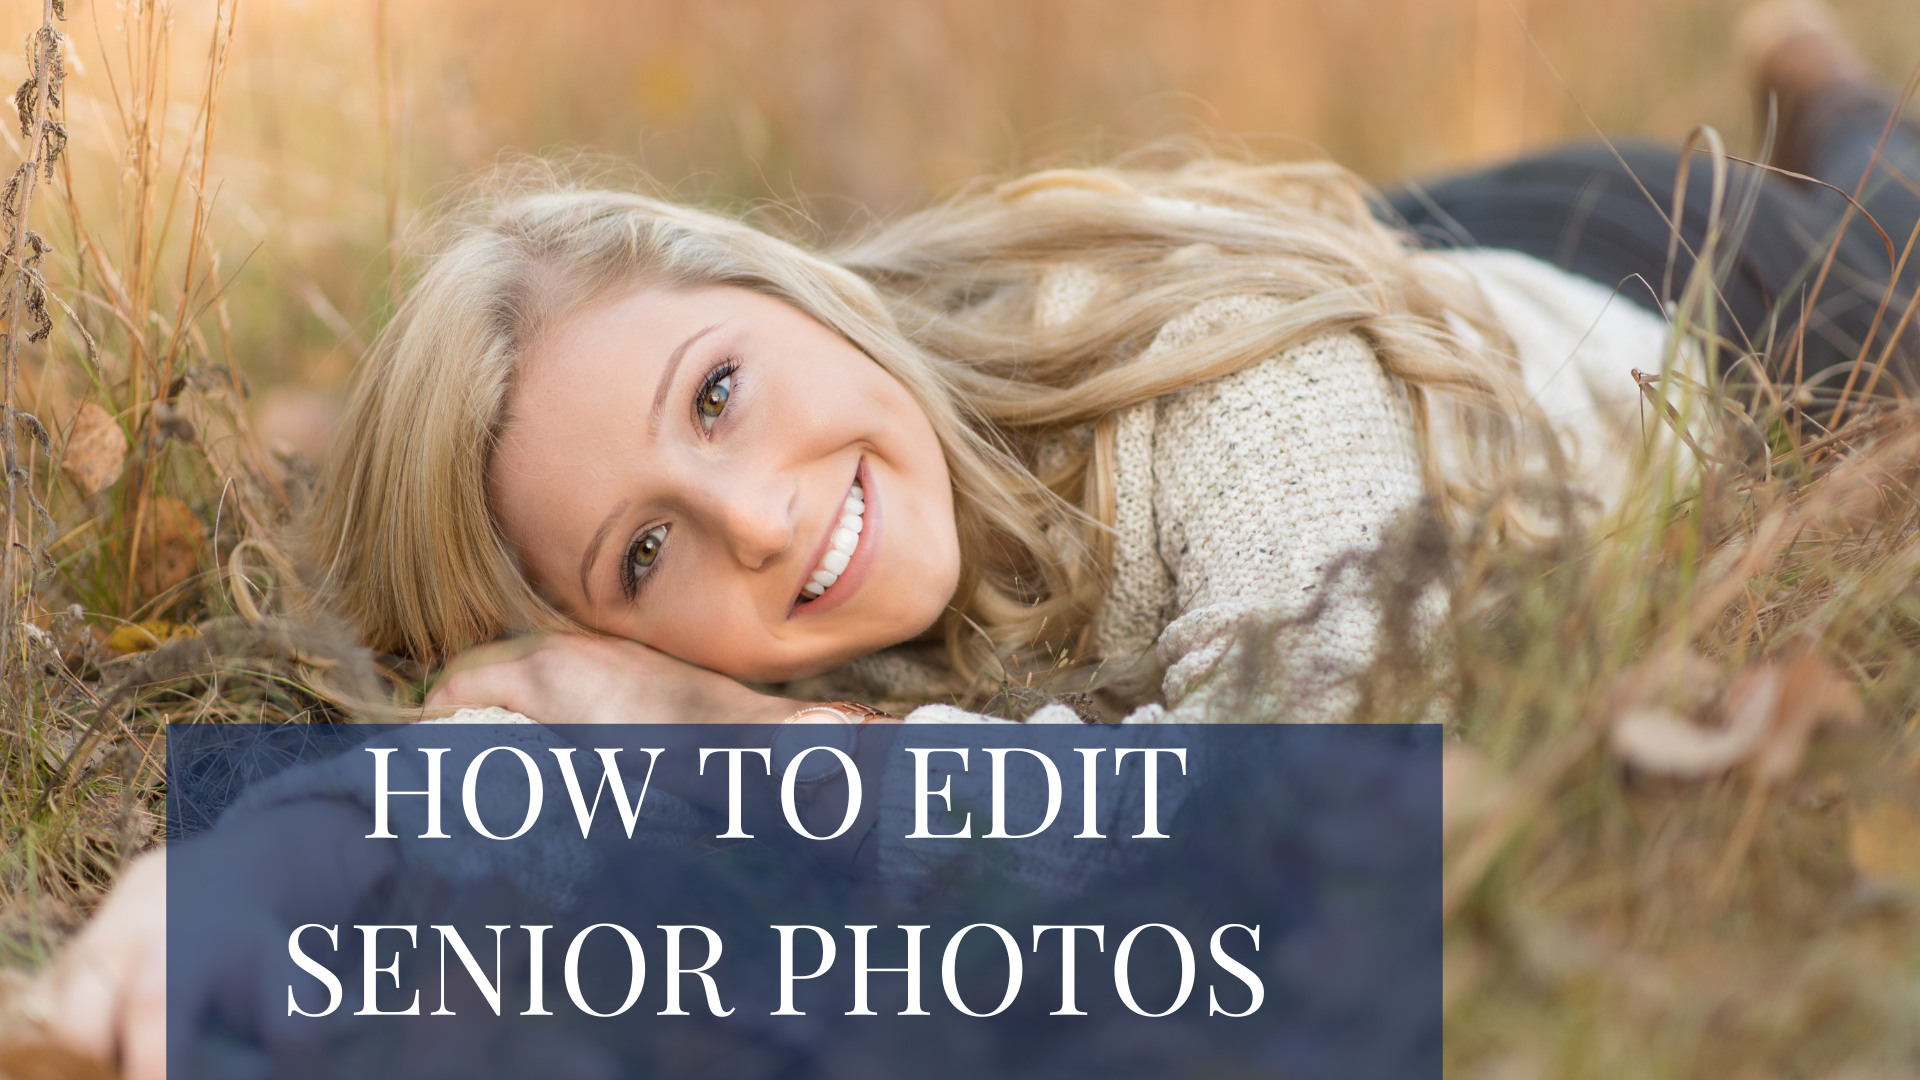 HOW TO EDIT SENIOR PICTURES